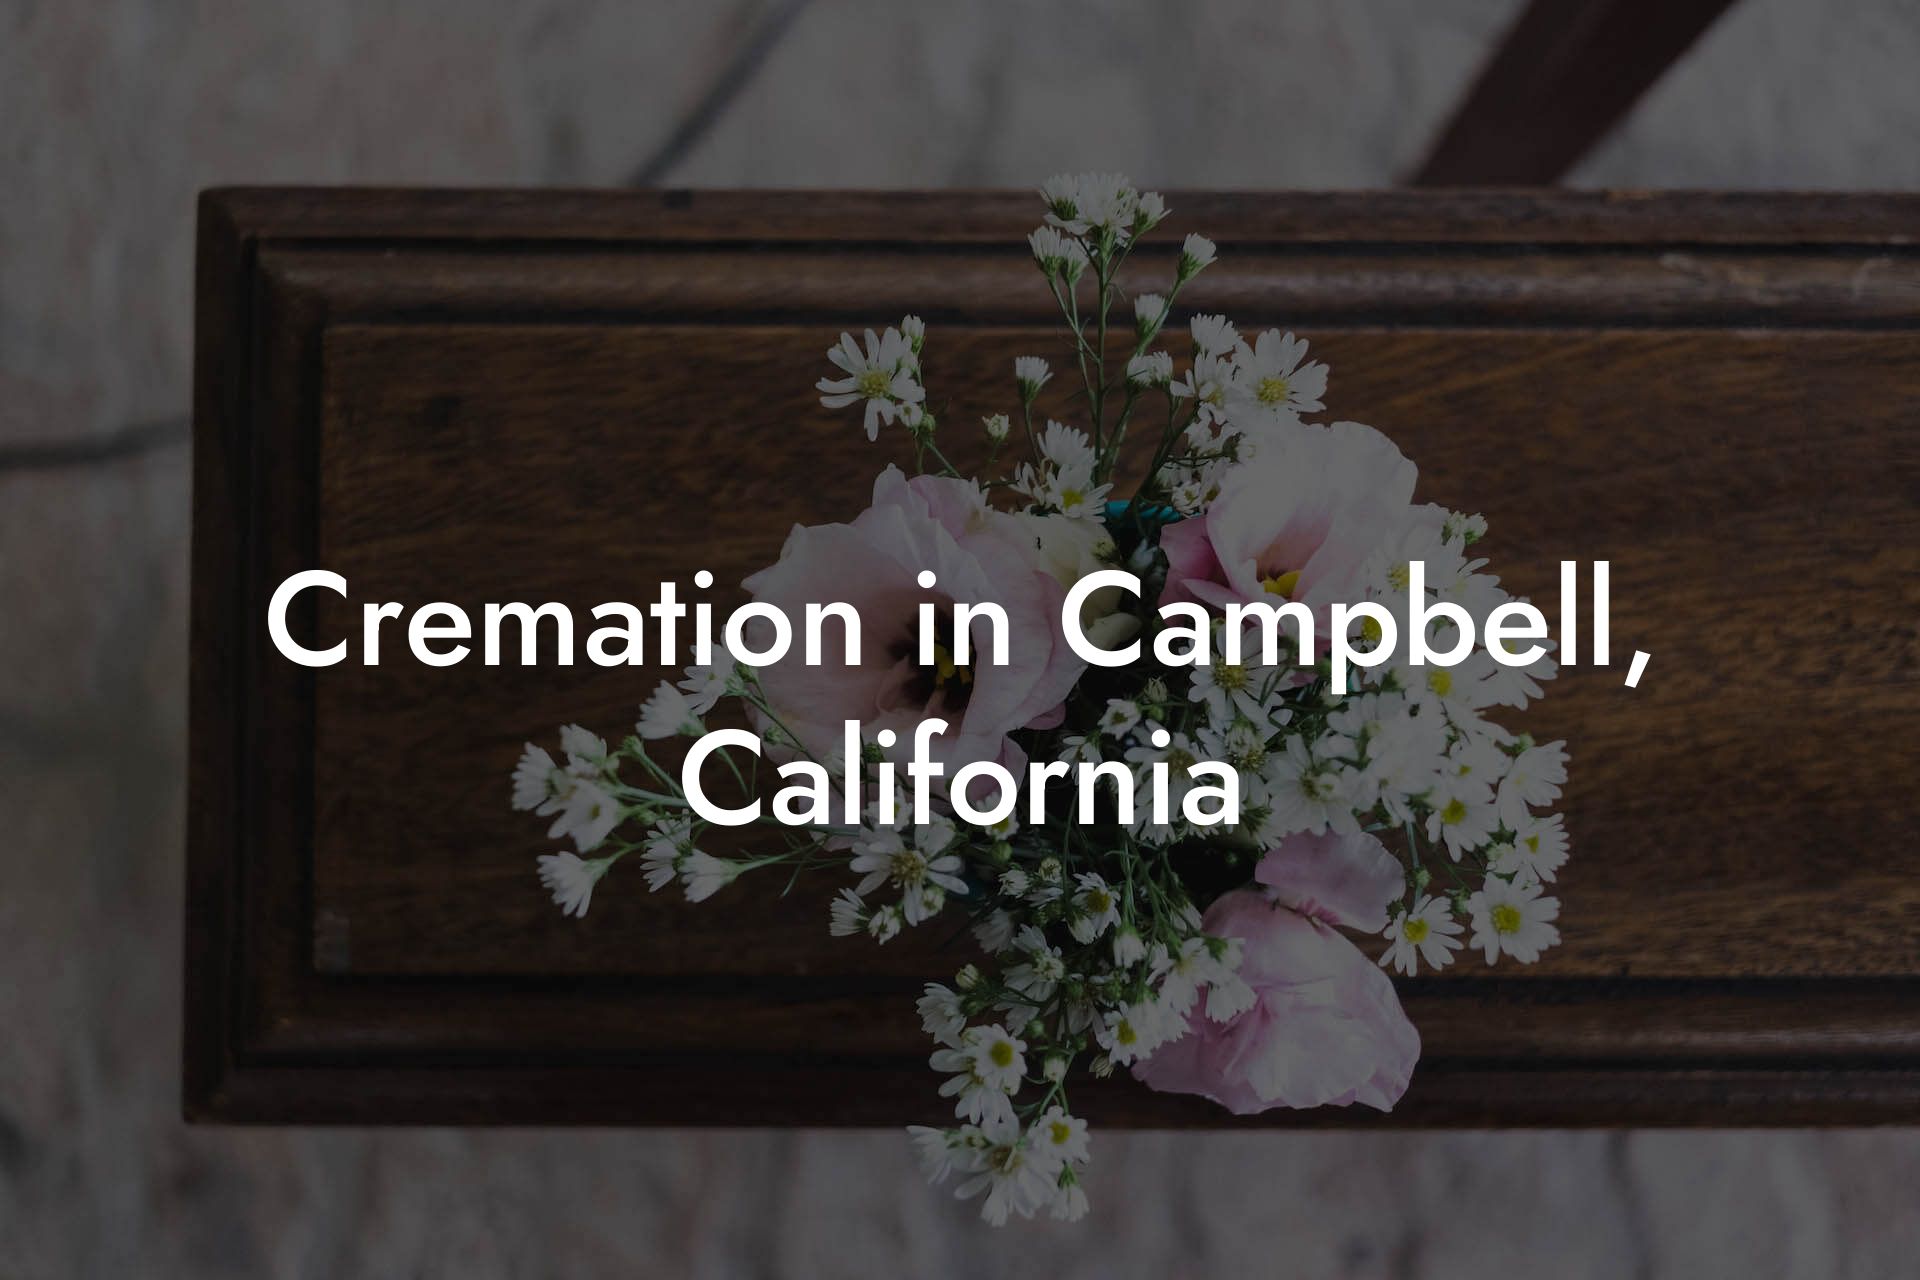 Cremation in Campbell, California